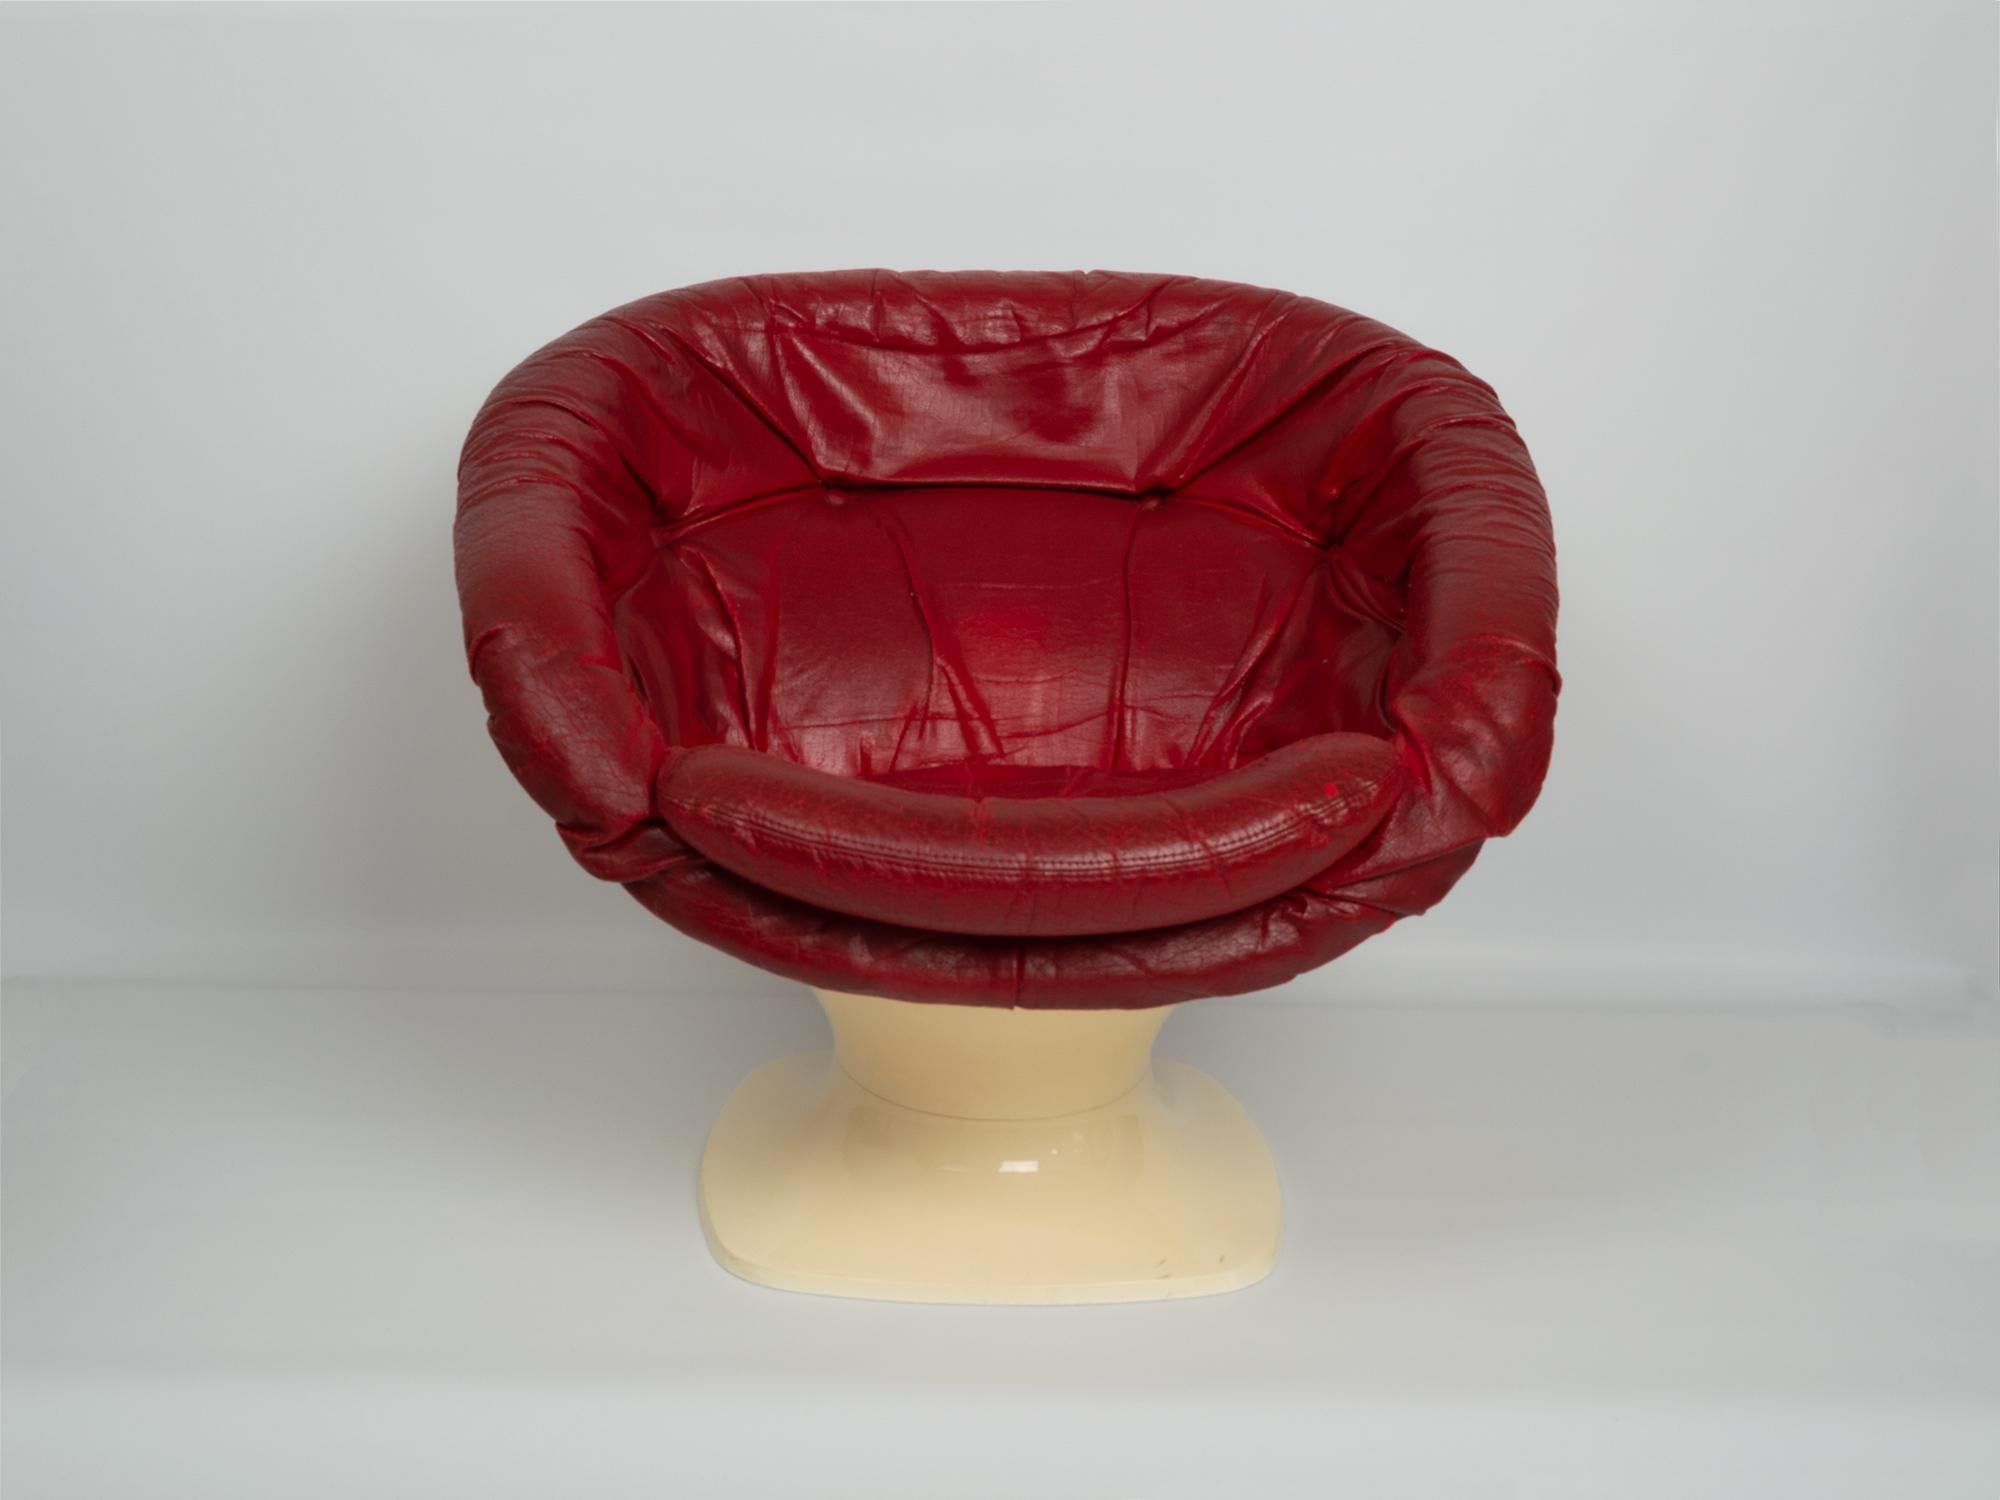 A Mid-Century Modern space age club chair by Raphael Raffel, France 1965.

The club chair features a tulip form with a rounded seat, covered in its original red leather upholstery. 

The plastic base in very good condition, and the leather